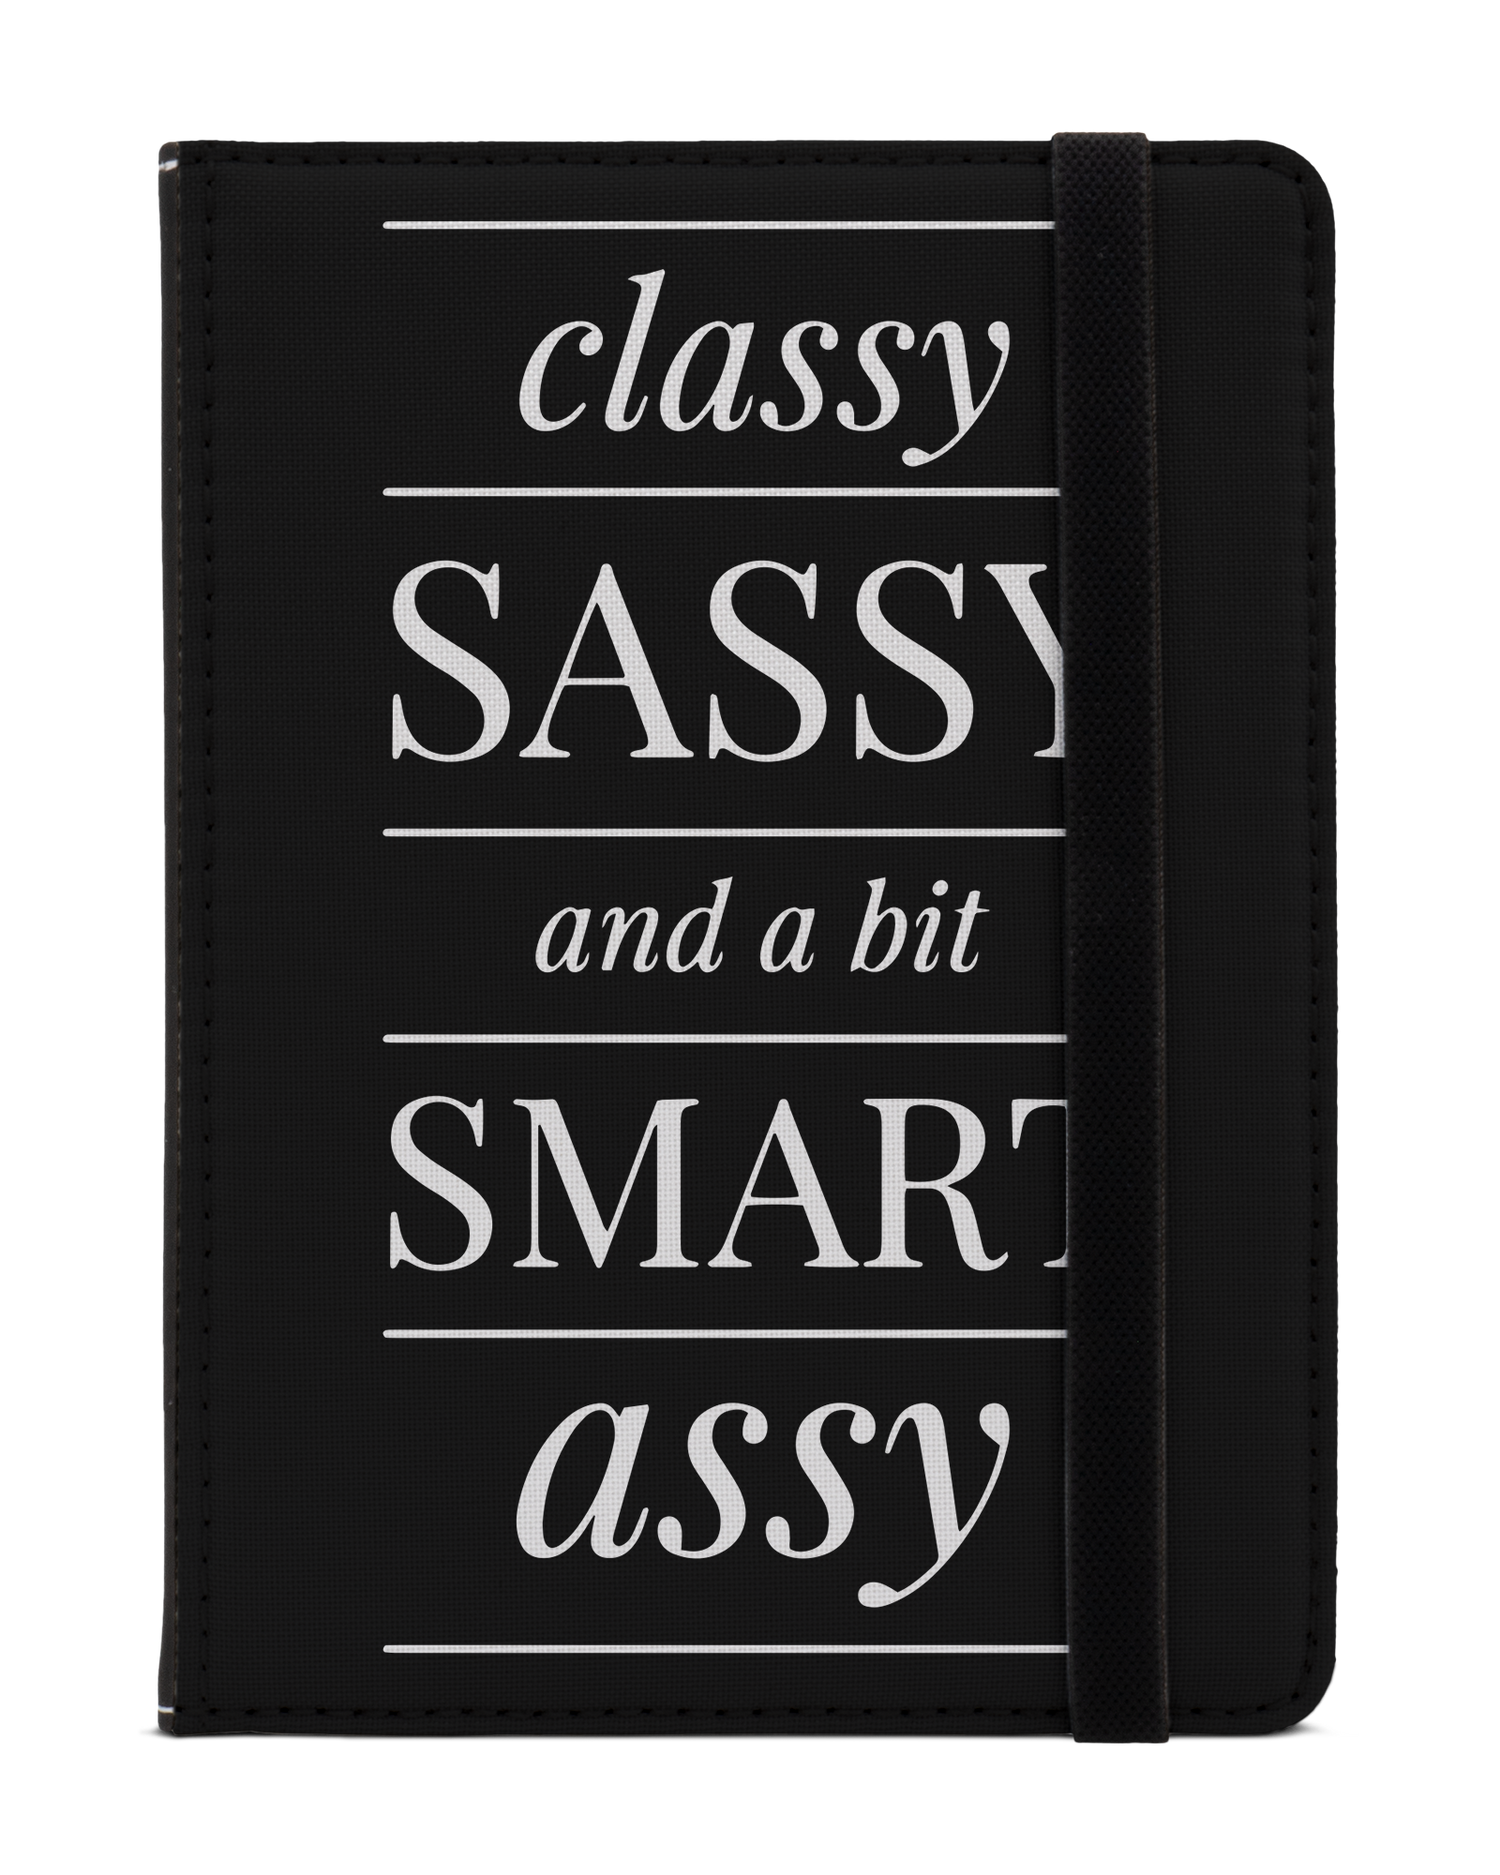 Classy Sassy eBook Reader Hülle XS: Frontansicht